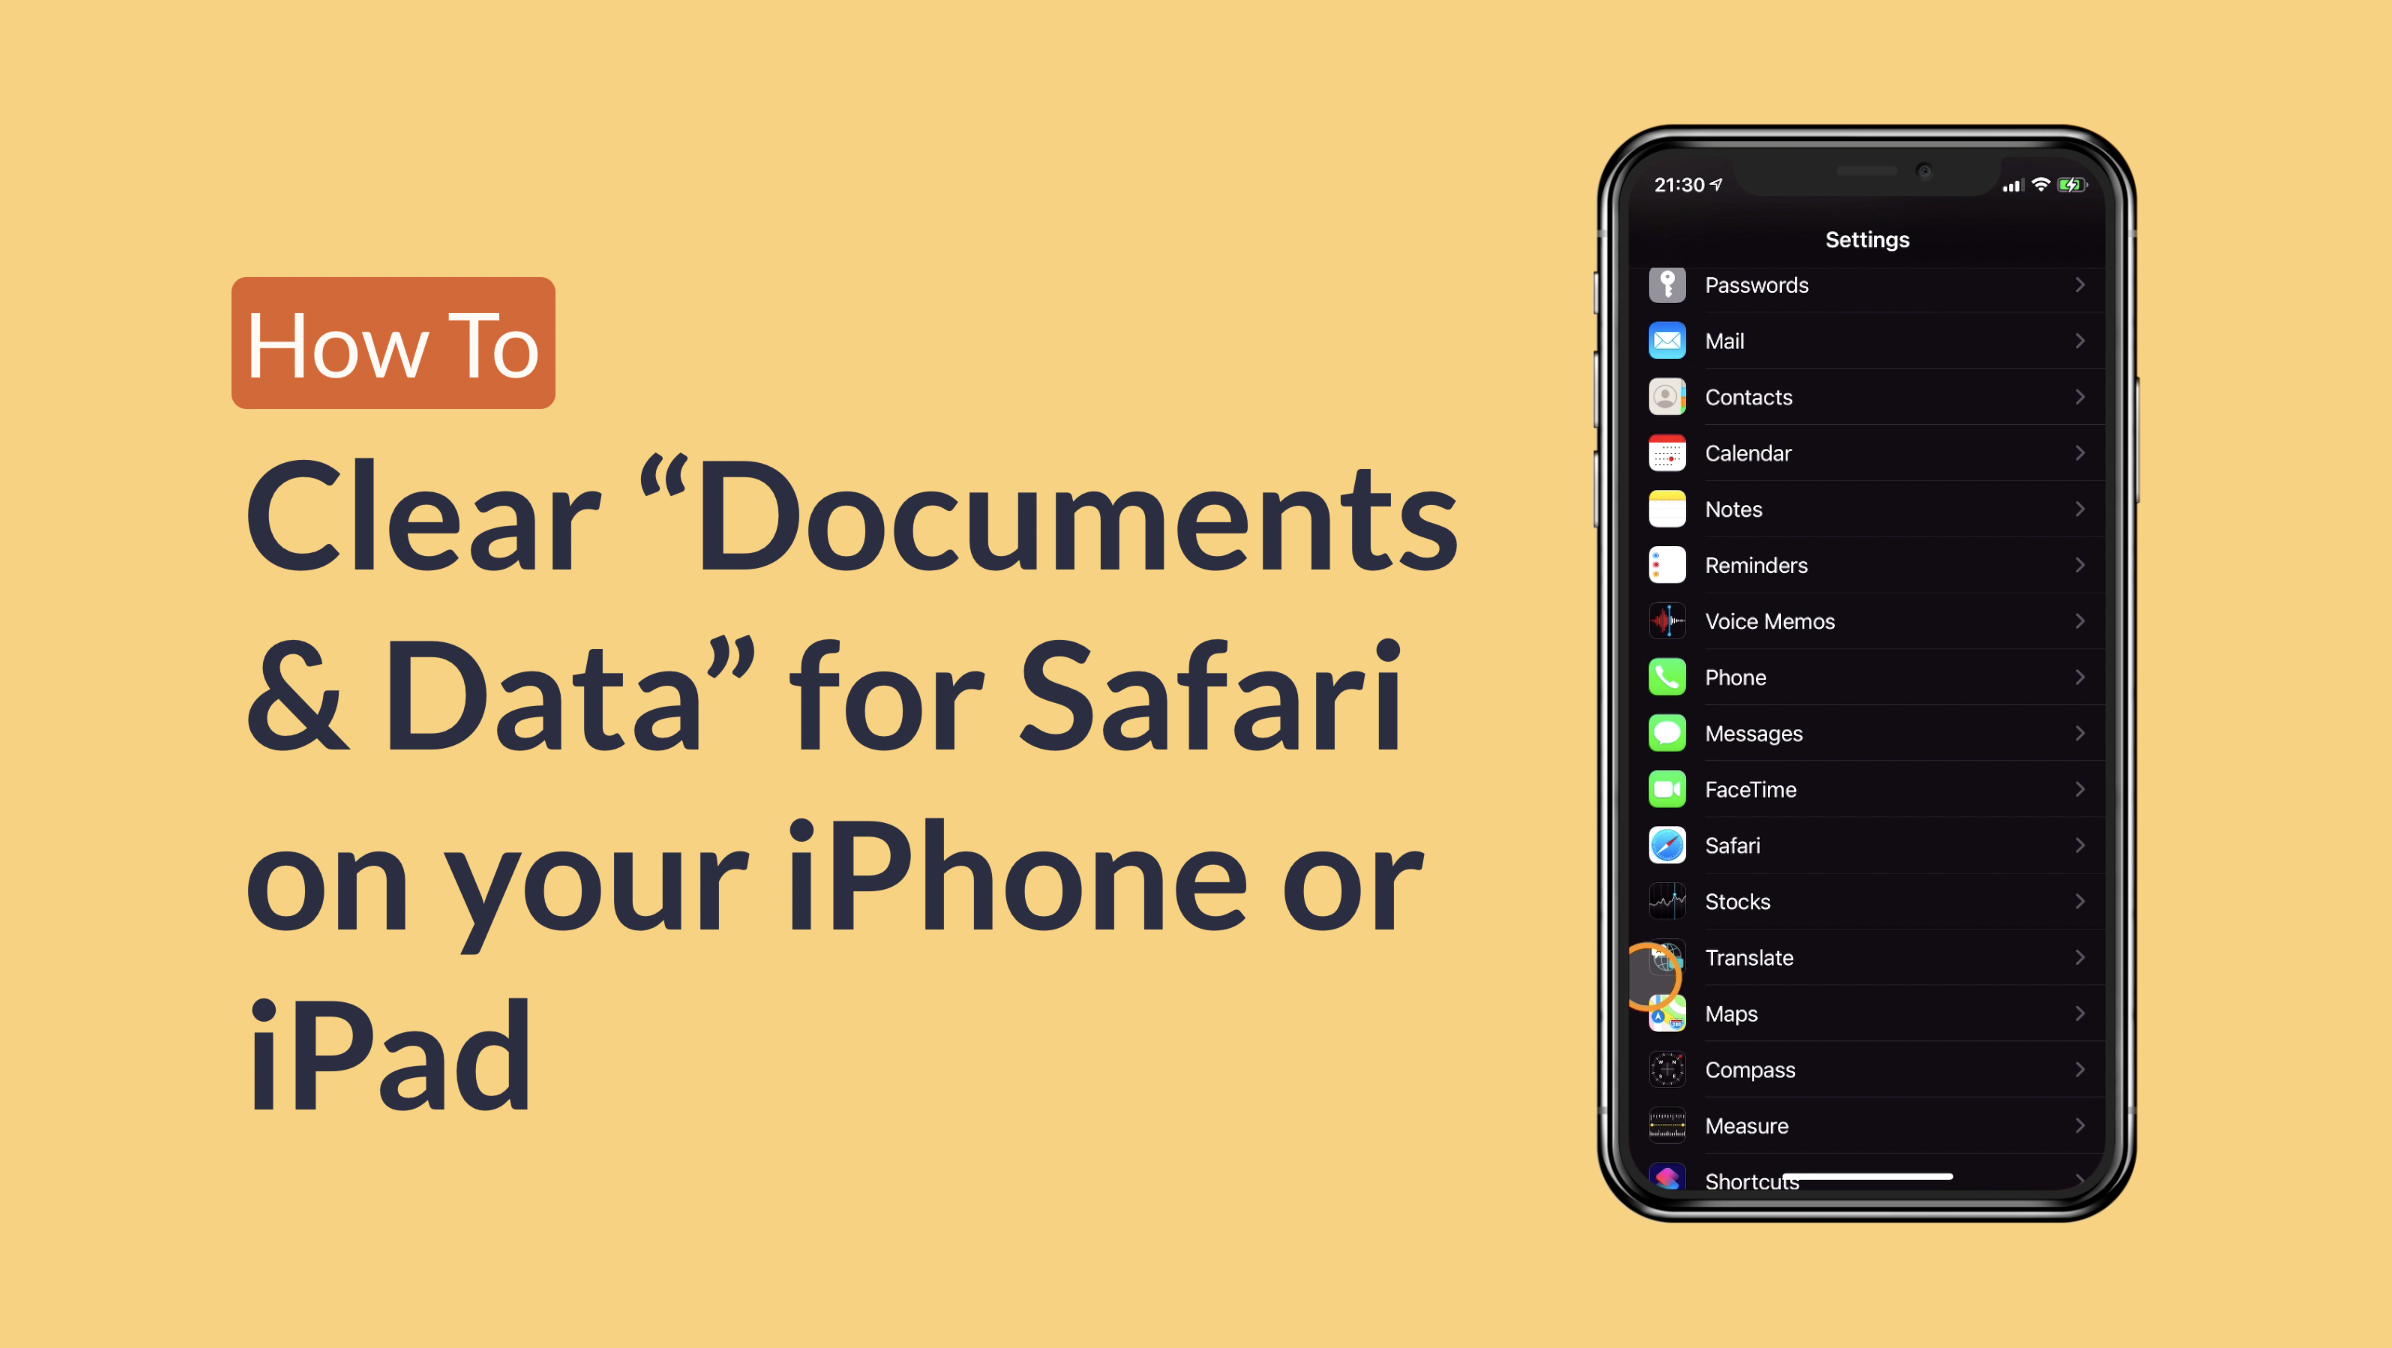 Discover how to clear “Documents & Data” for Safari on your iPhone or iPad